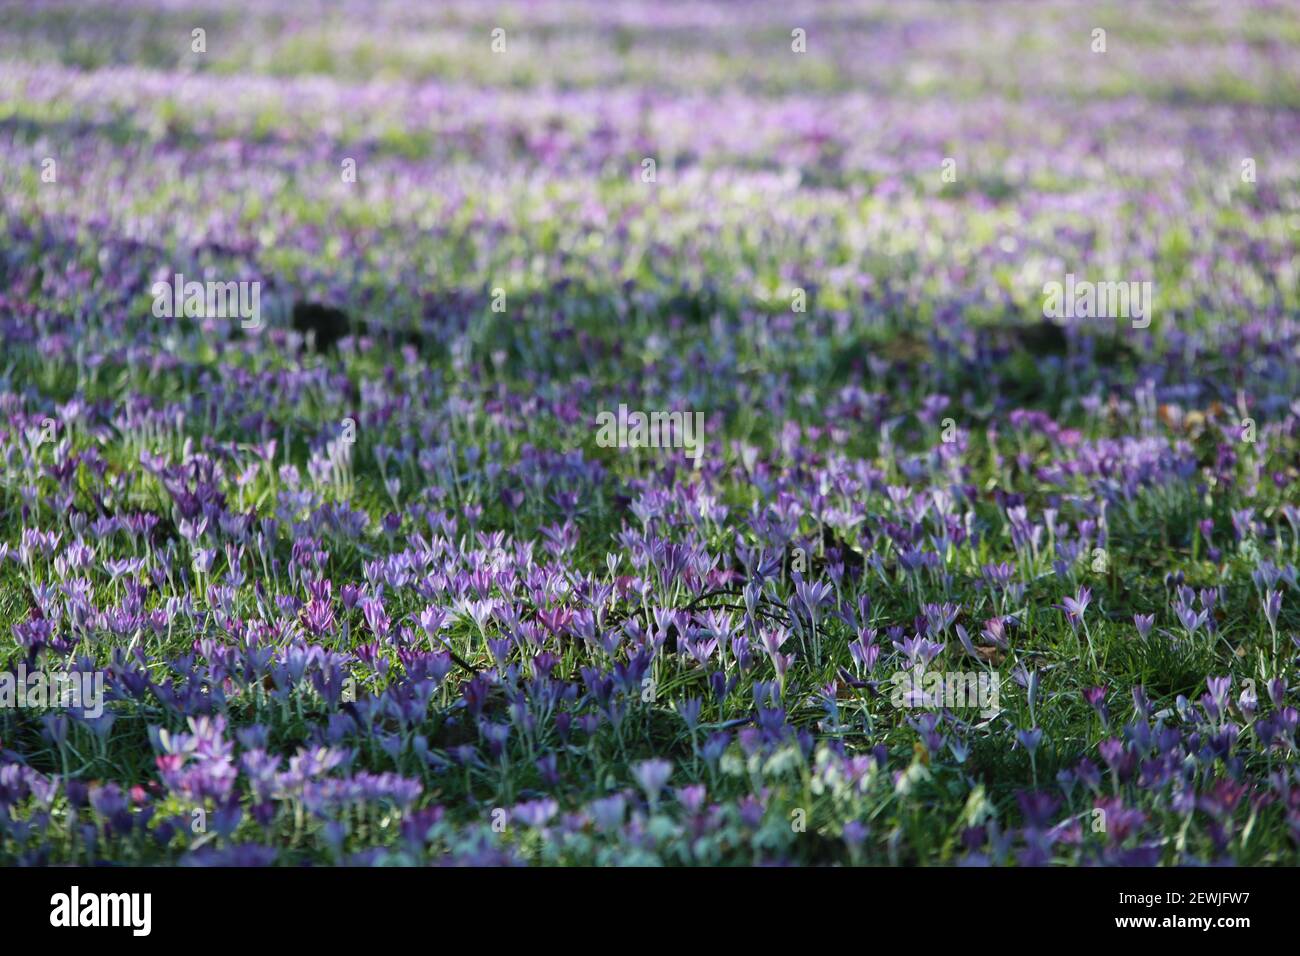 Crocus carpet on a meadow in the park Stock Photo